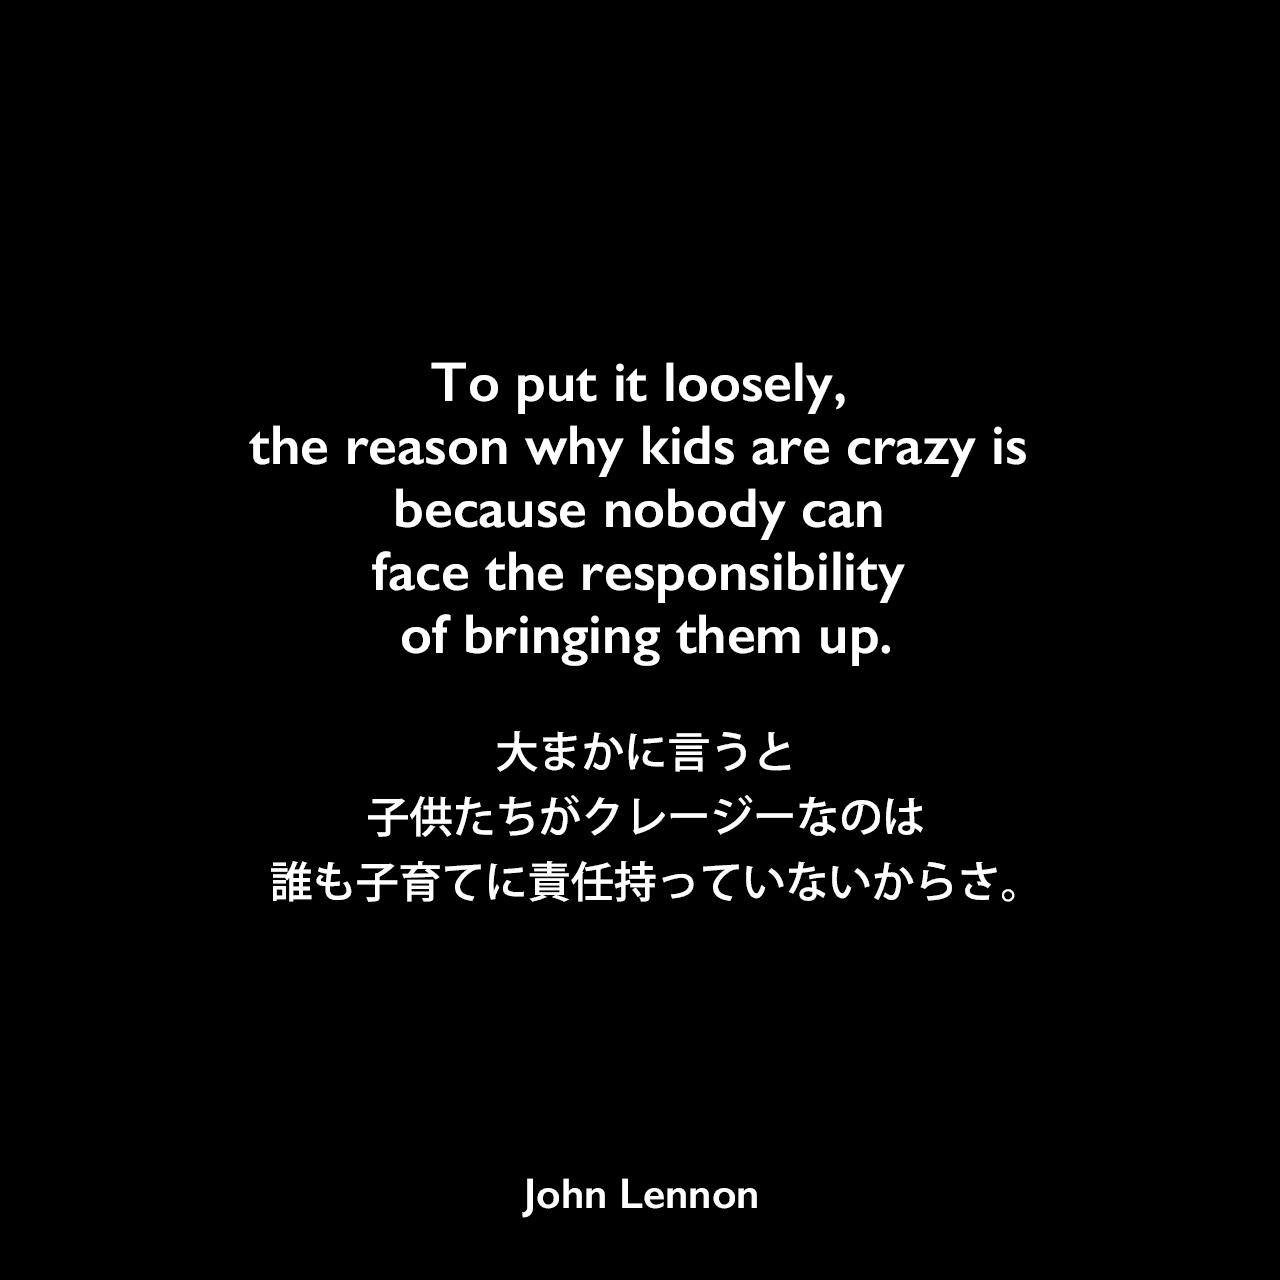 To put it loosely, the reason why kids are crazy is because nobody can face the responsibility of bringing them up.大まかに言うと、子供たちがクレージーなのは誰も子育てに責任持っていないからさ。John Lennon